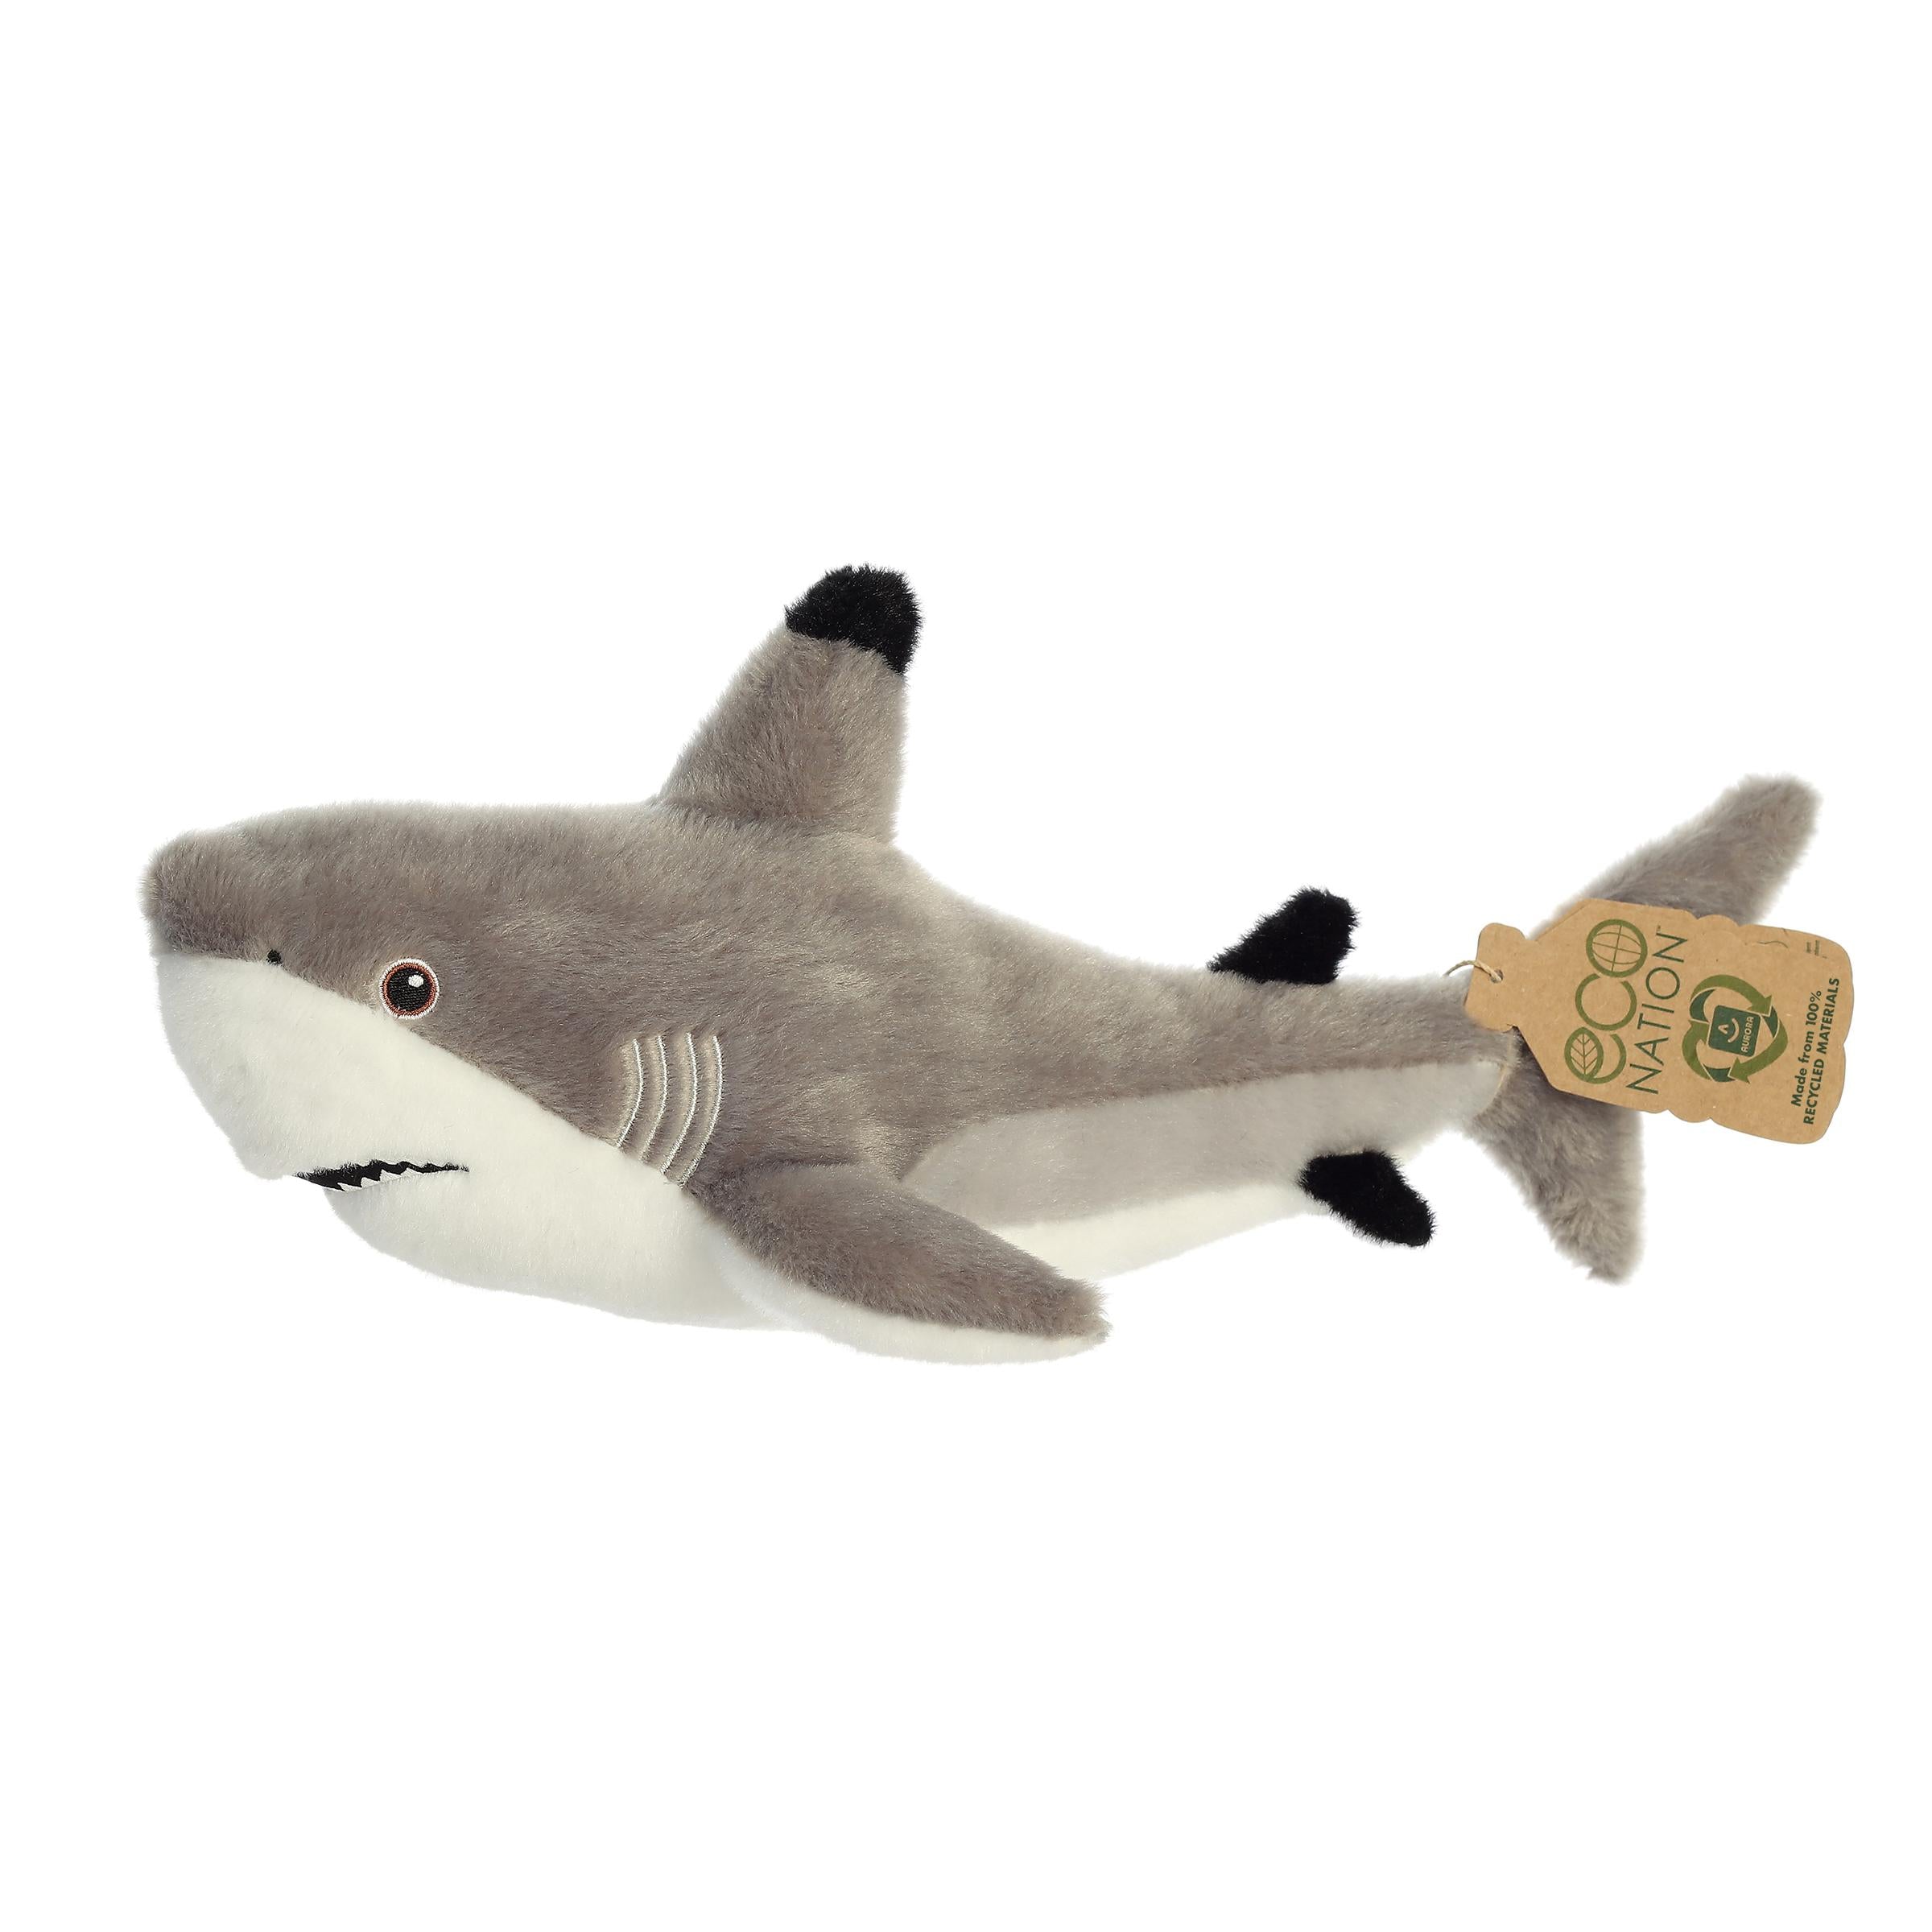 A captivating shark plush with black tips on its fins, detailed embroidered eyes, and an eco-nation tag around its tail